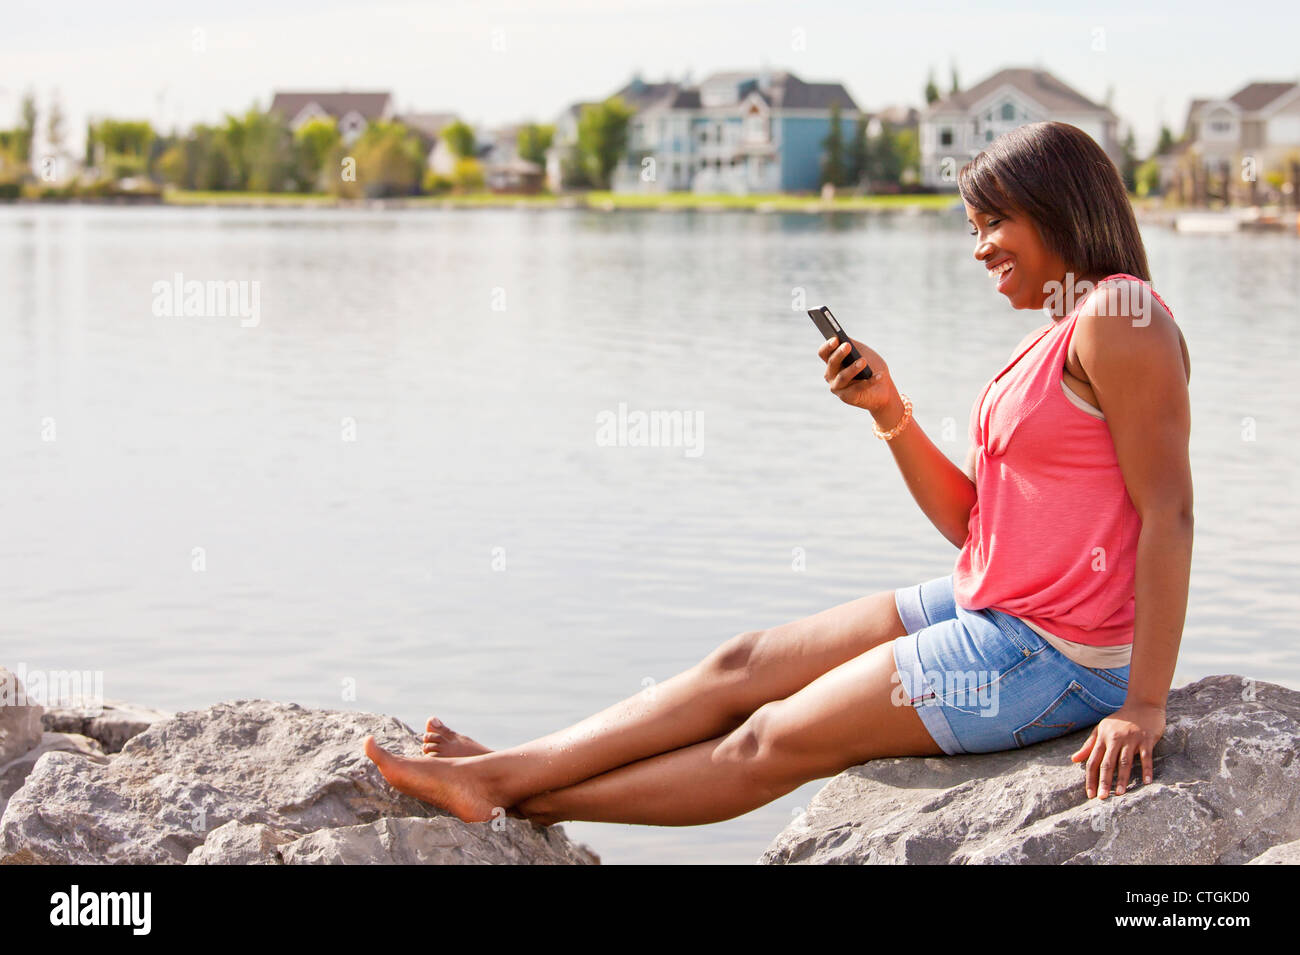 Teenage Girl Viewing Test Messages While Relaxing On The Shore Of A Residential Lake Area; Edmonton, Alberta, Canada Stock Photo